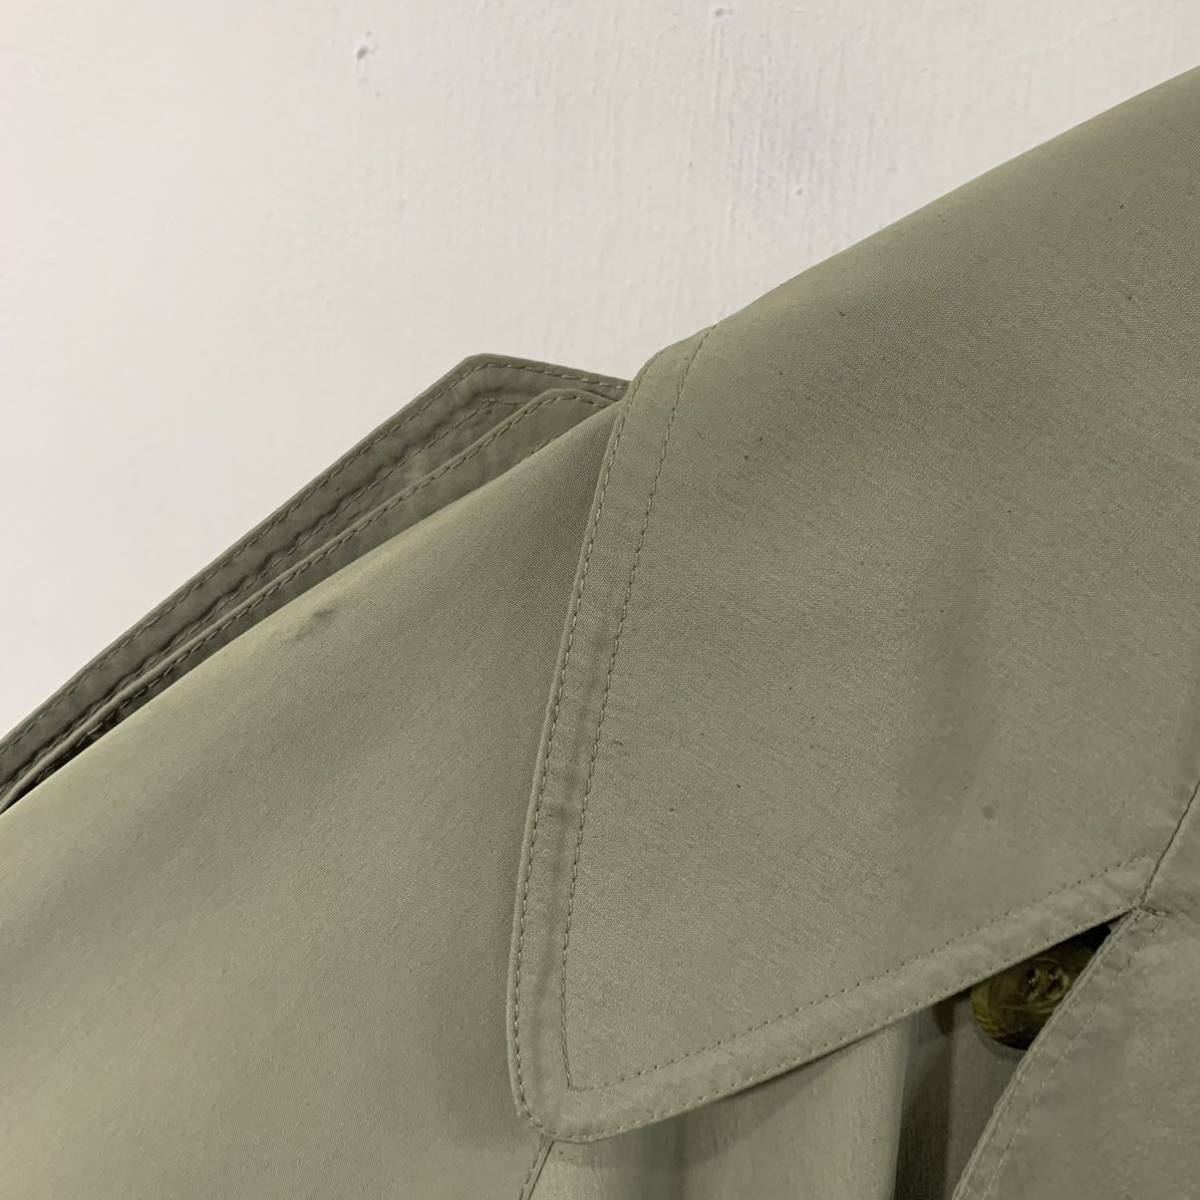 Aquascutum trench coat Canada made long coat la gran sleeve belt attaching VINTAGE Epo let Aquascutum [ uniform carriage / including in a package possibility ]